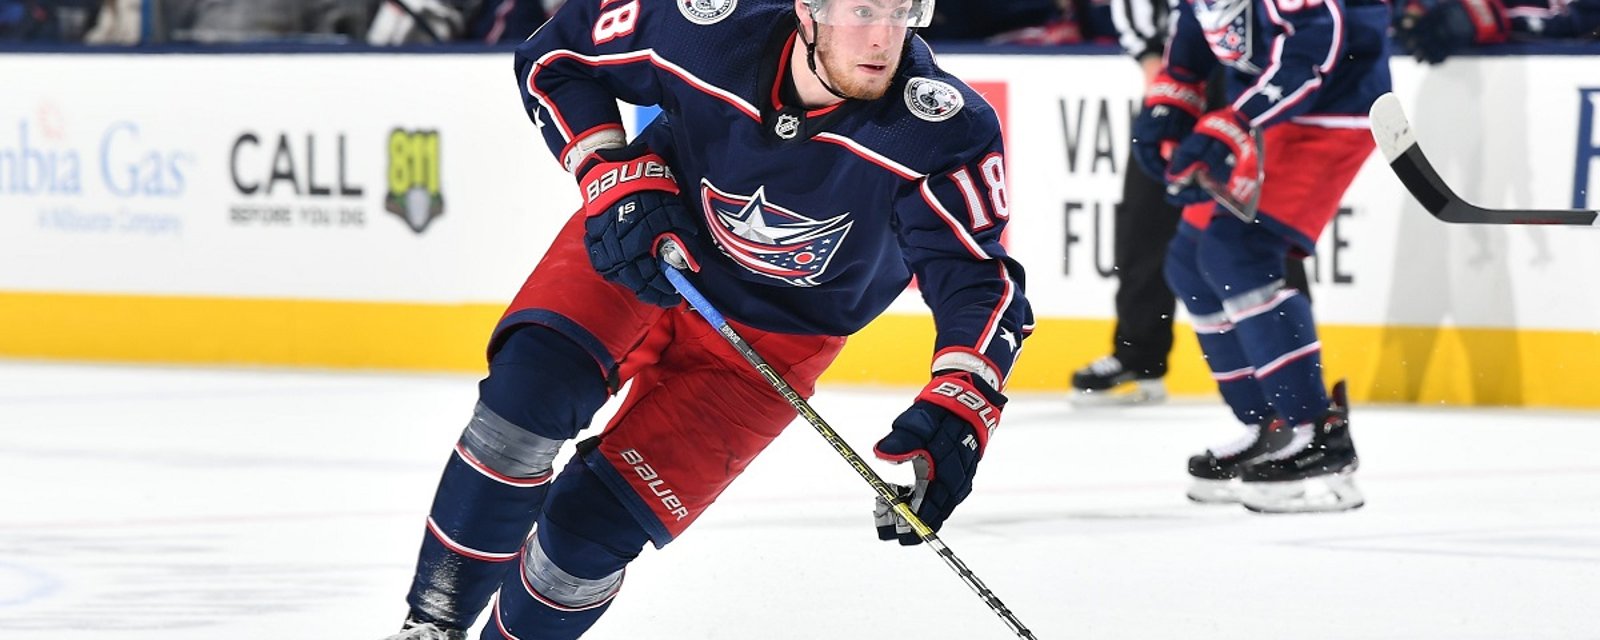 Contract talks with Pierre-Luc Dubois have stalled.